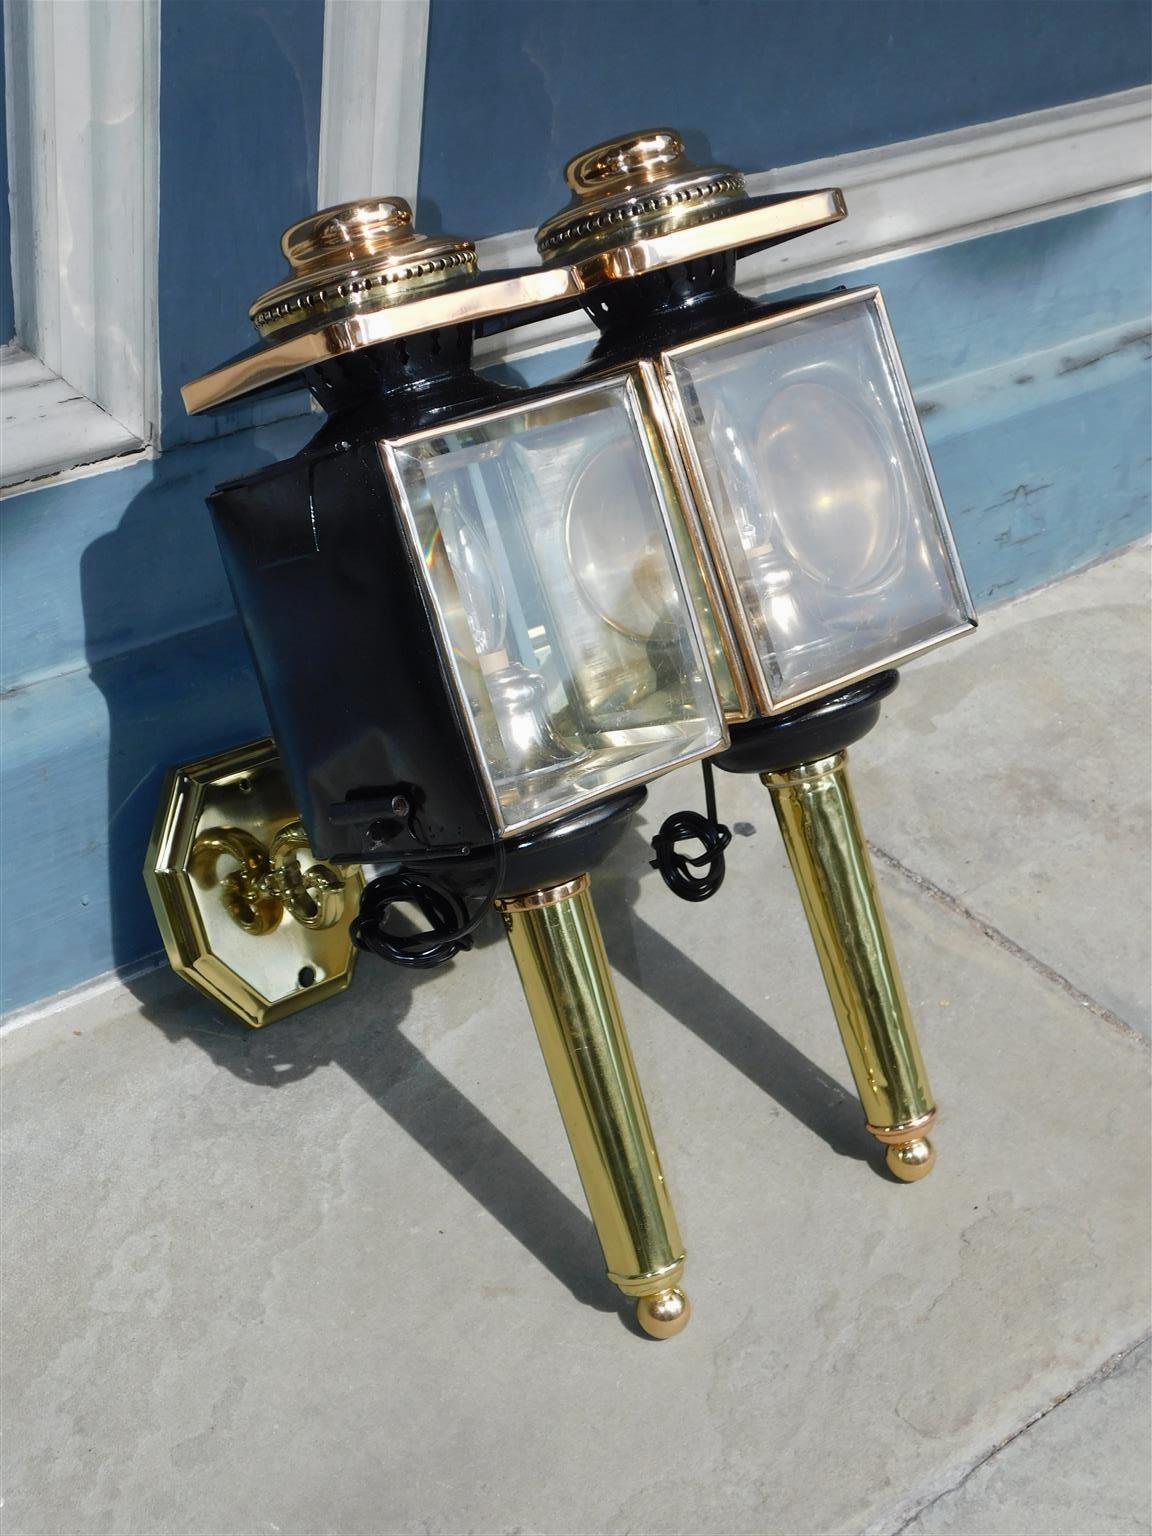 Pair of American brass and copper coach lanterns with the original beveled glass and foliage scrolled mounting brackets. Warner and Co. Cherry ST. Philadelphia. Pair have been electrified and lacquered for exterior exposure. Early 19th Century.